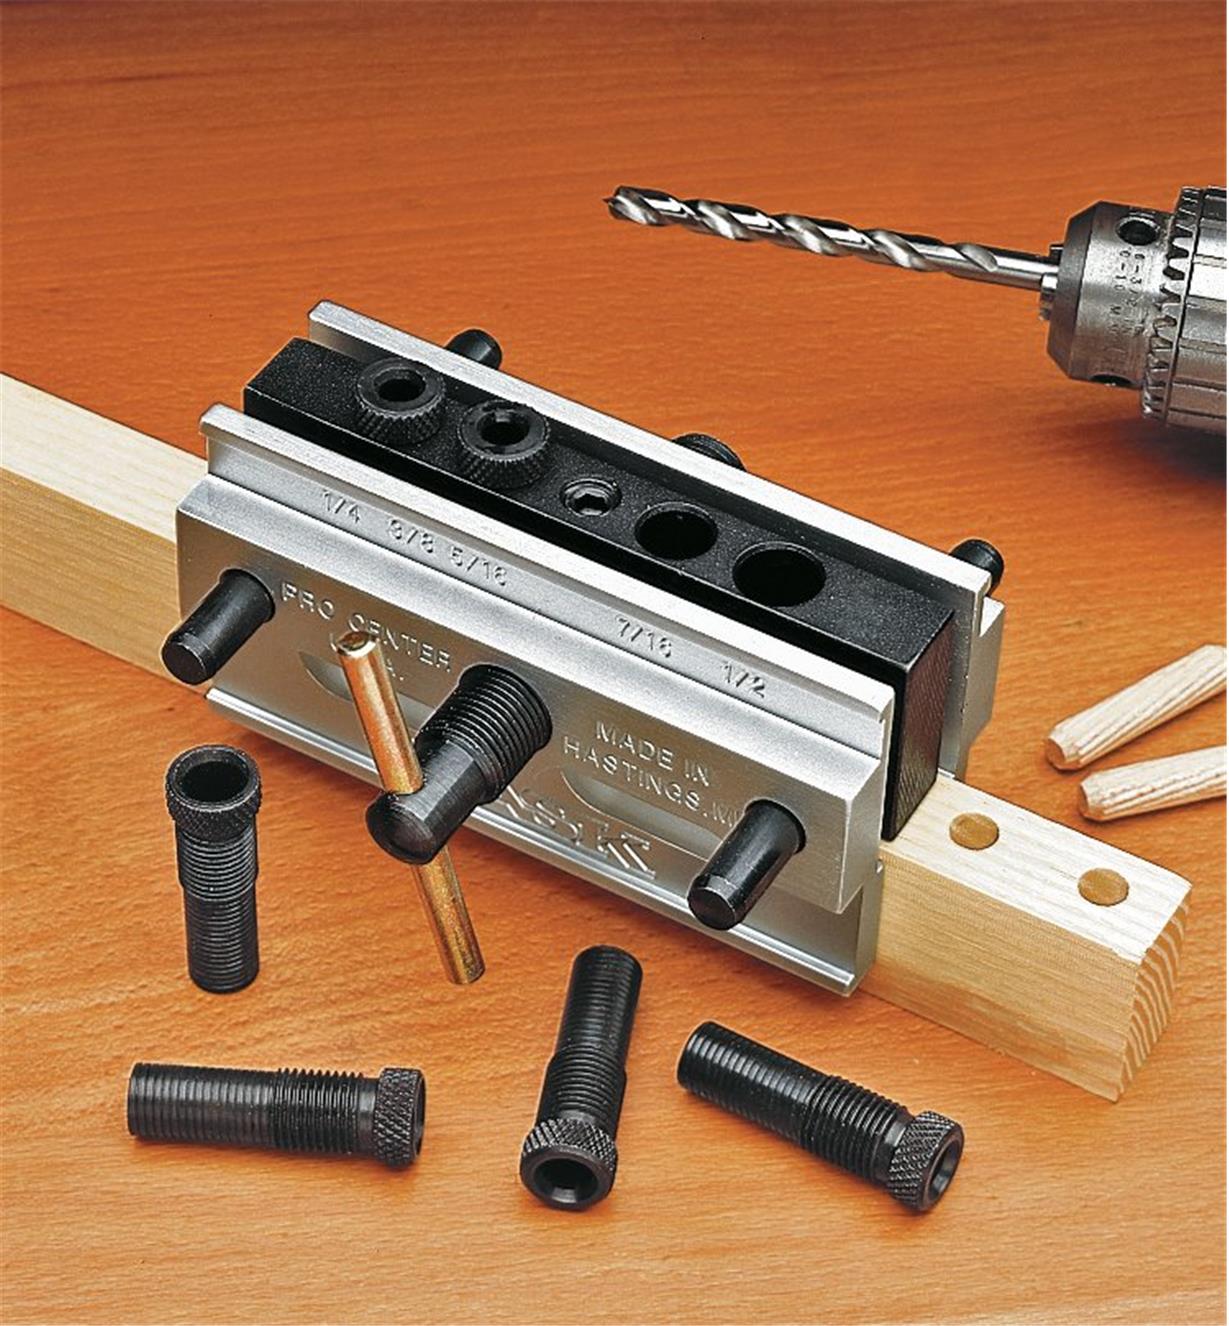 The Self-Centering Dowelling Jig secured to a board, with a power drill and dowel pins next to it